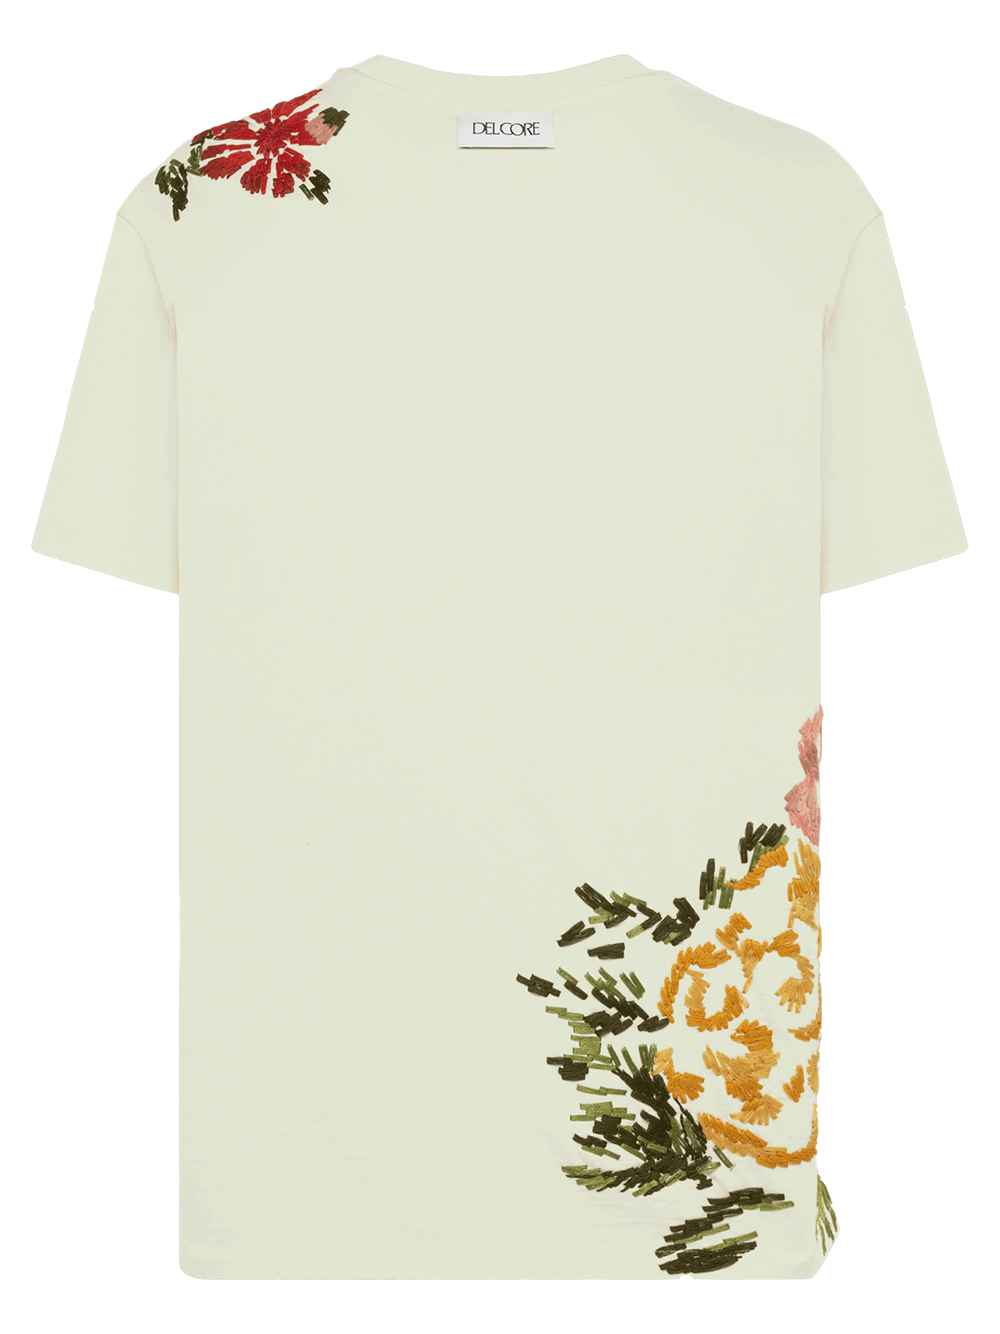 Del-Core-Boxy-T-Shirt-With-Embroidery-White-2